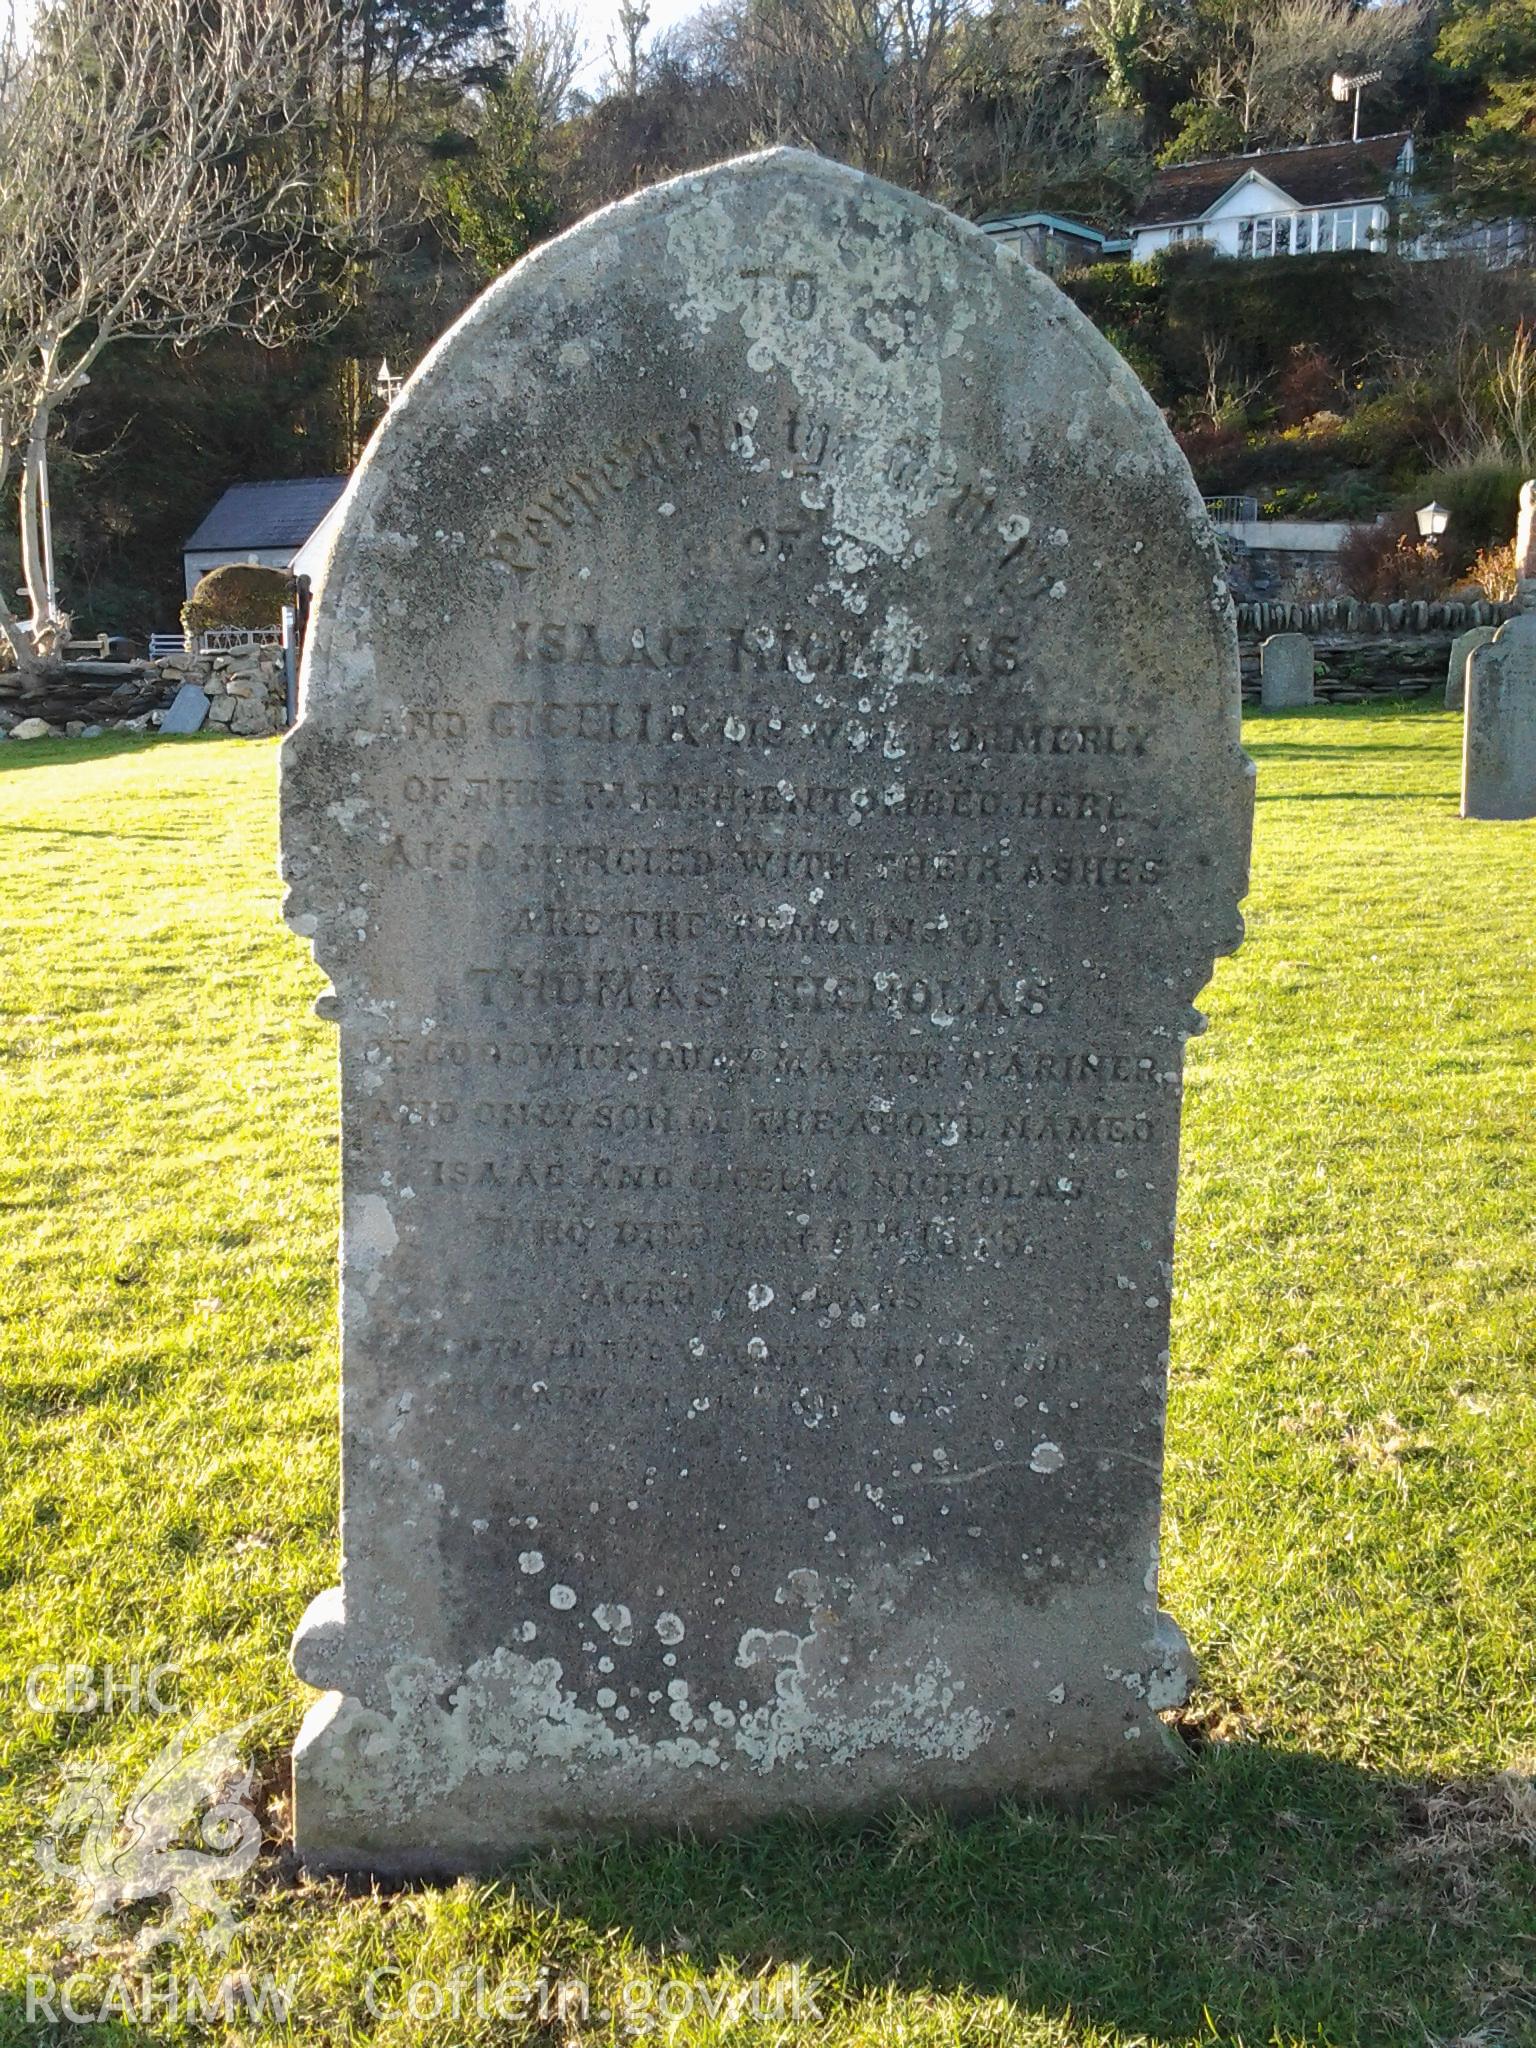 Gravestone of Isaac Nicholas and Cecilia his wife, and their son Thomas Nicholas, master mariner of Goodwick